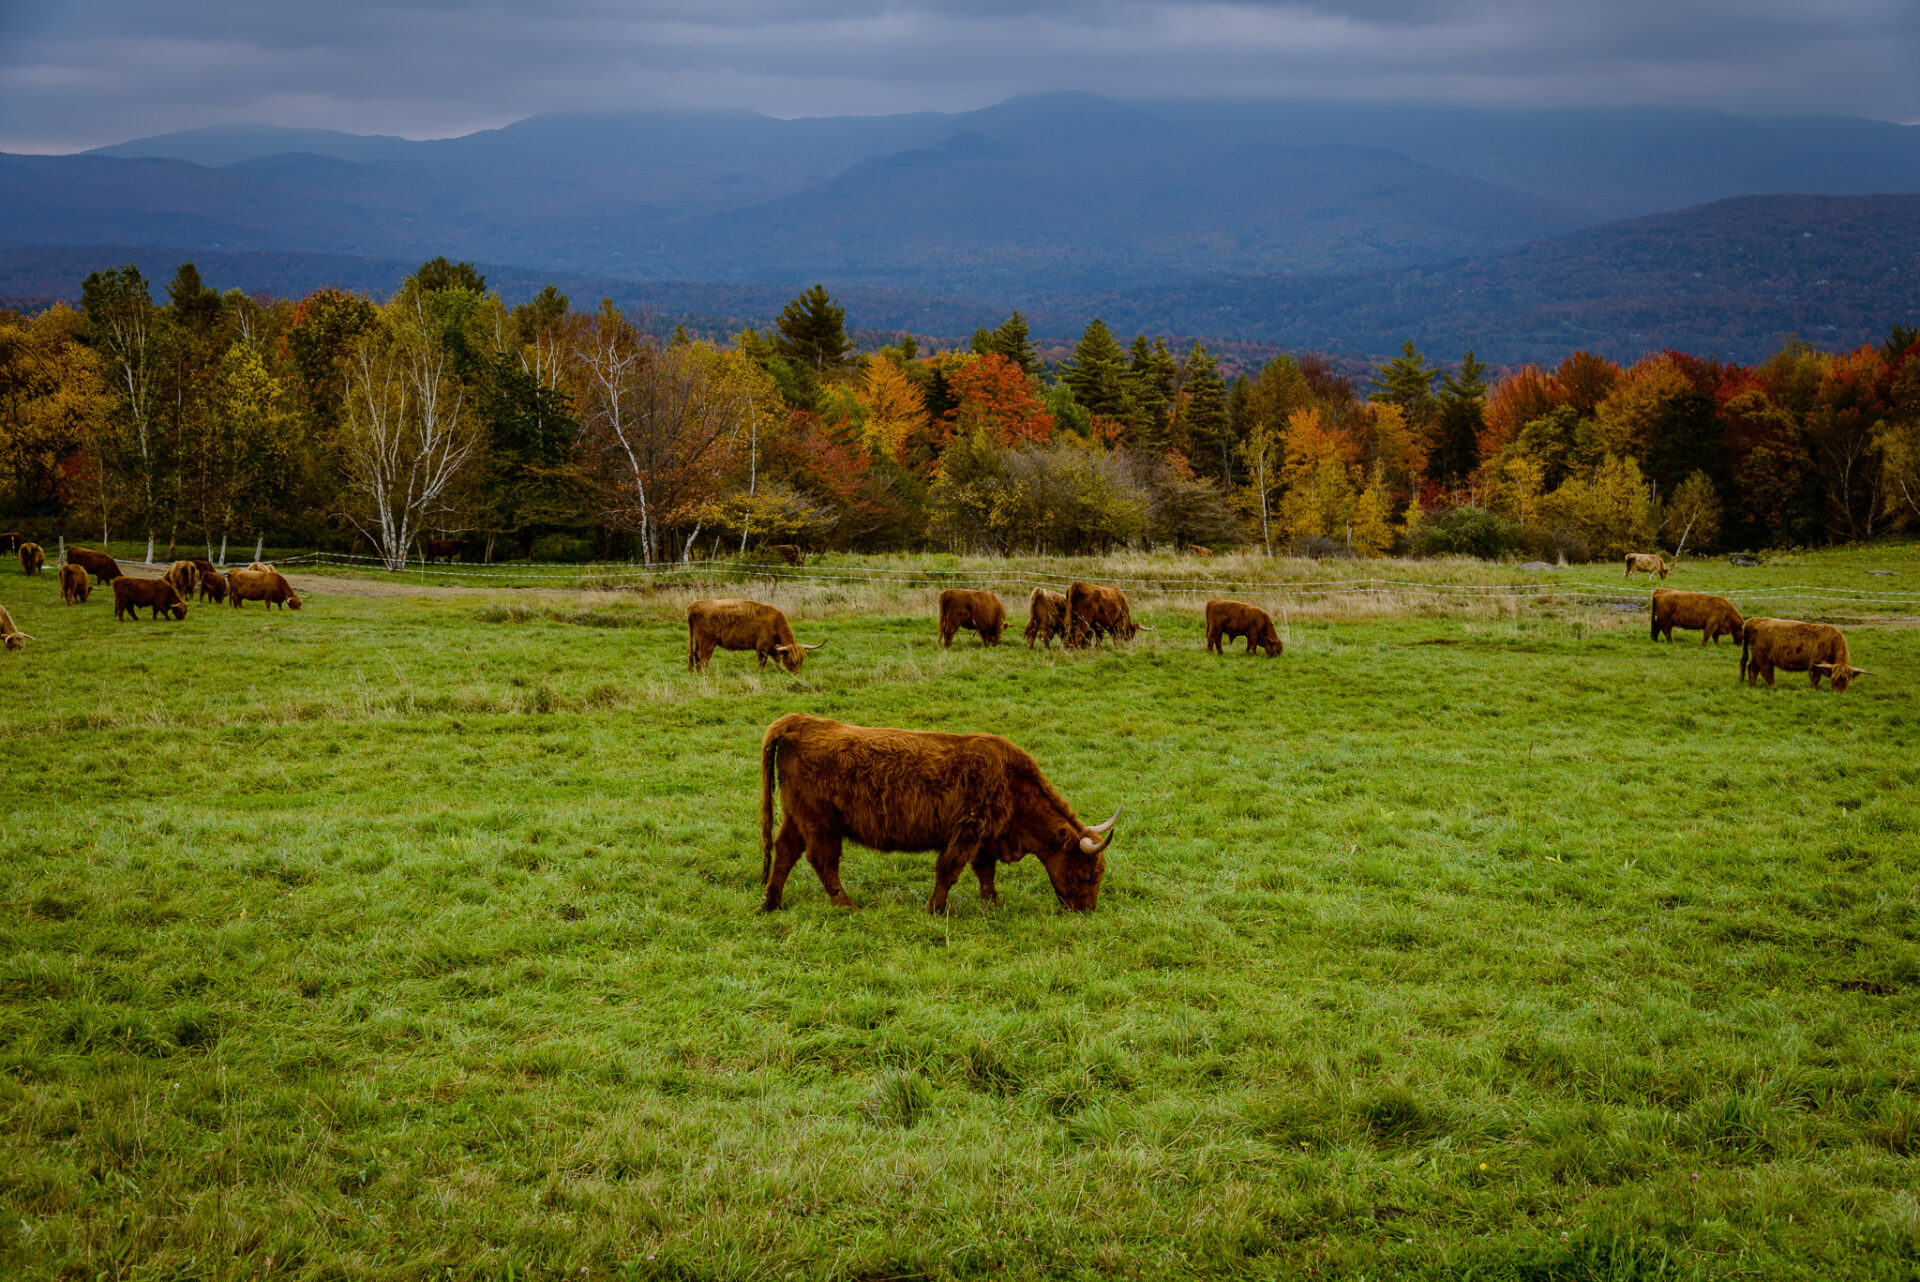 Bulls graze on a dark fall day at the Trapp Family Lodge